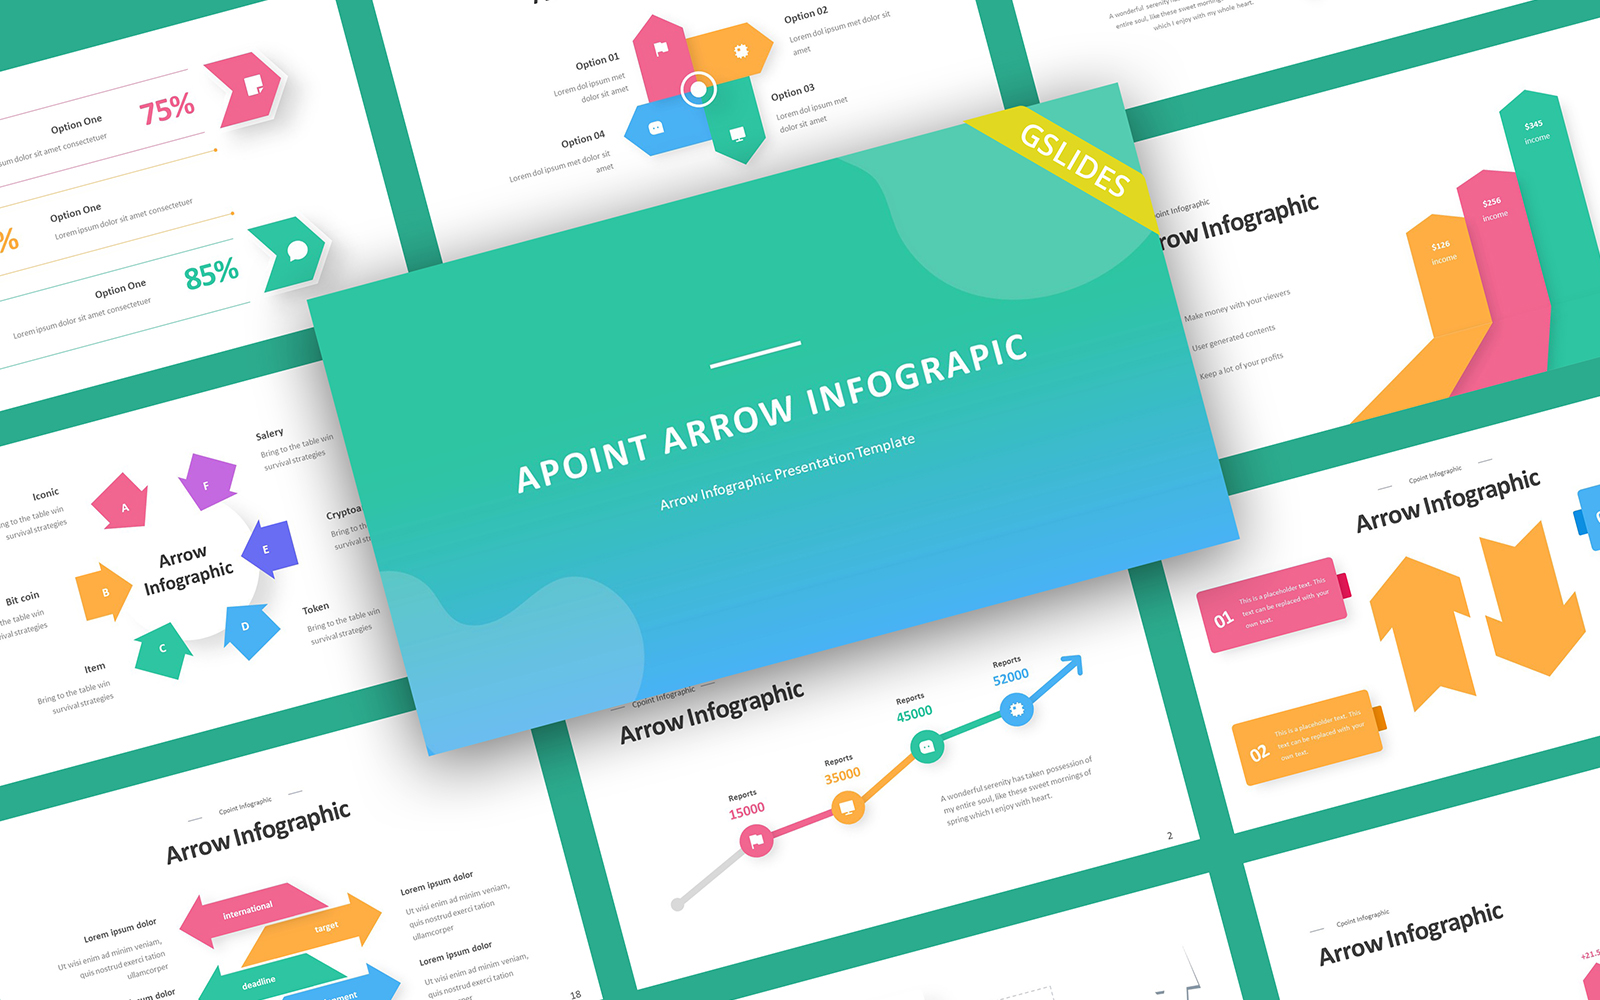 template-261305-apoint-arrow-infographic-google-slides-template-website-brobst-systems